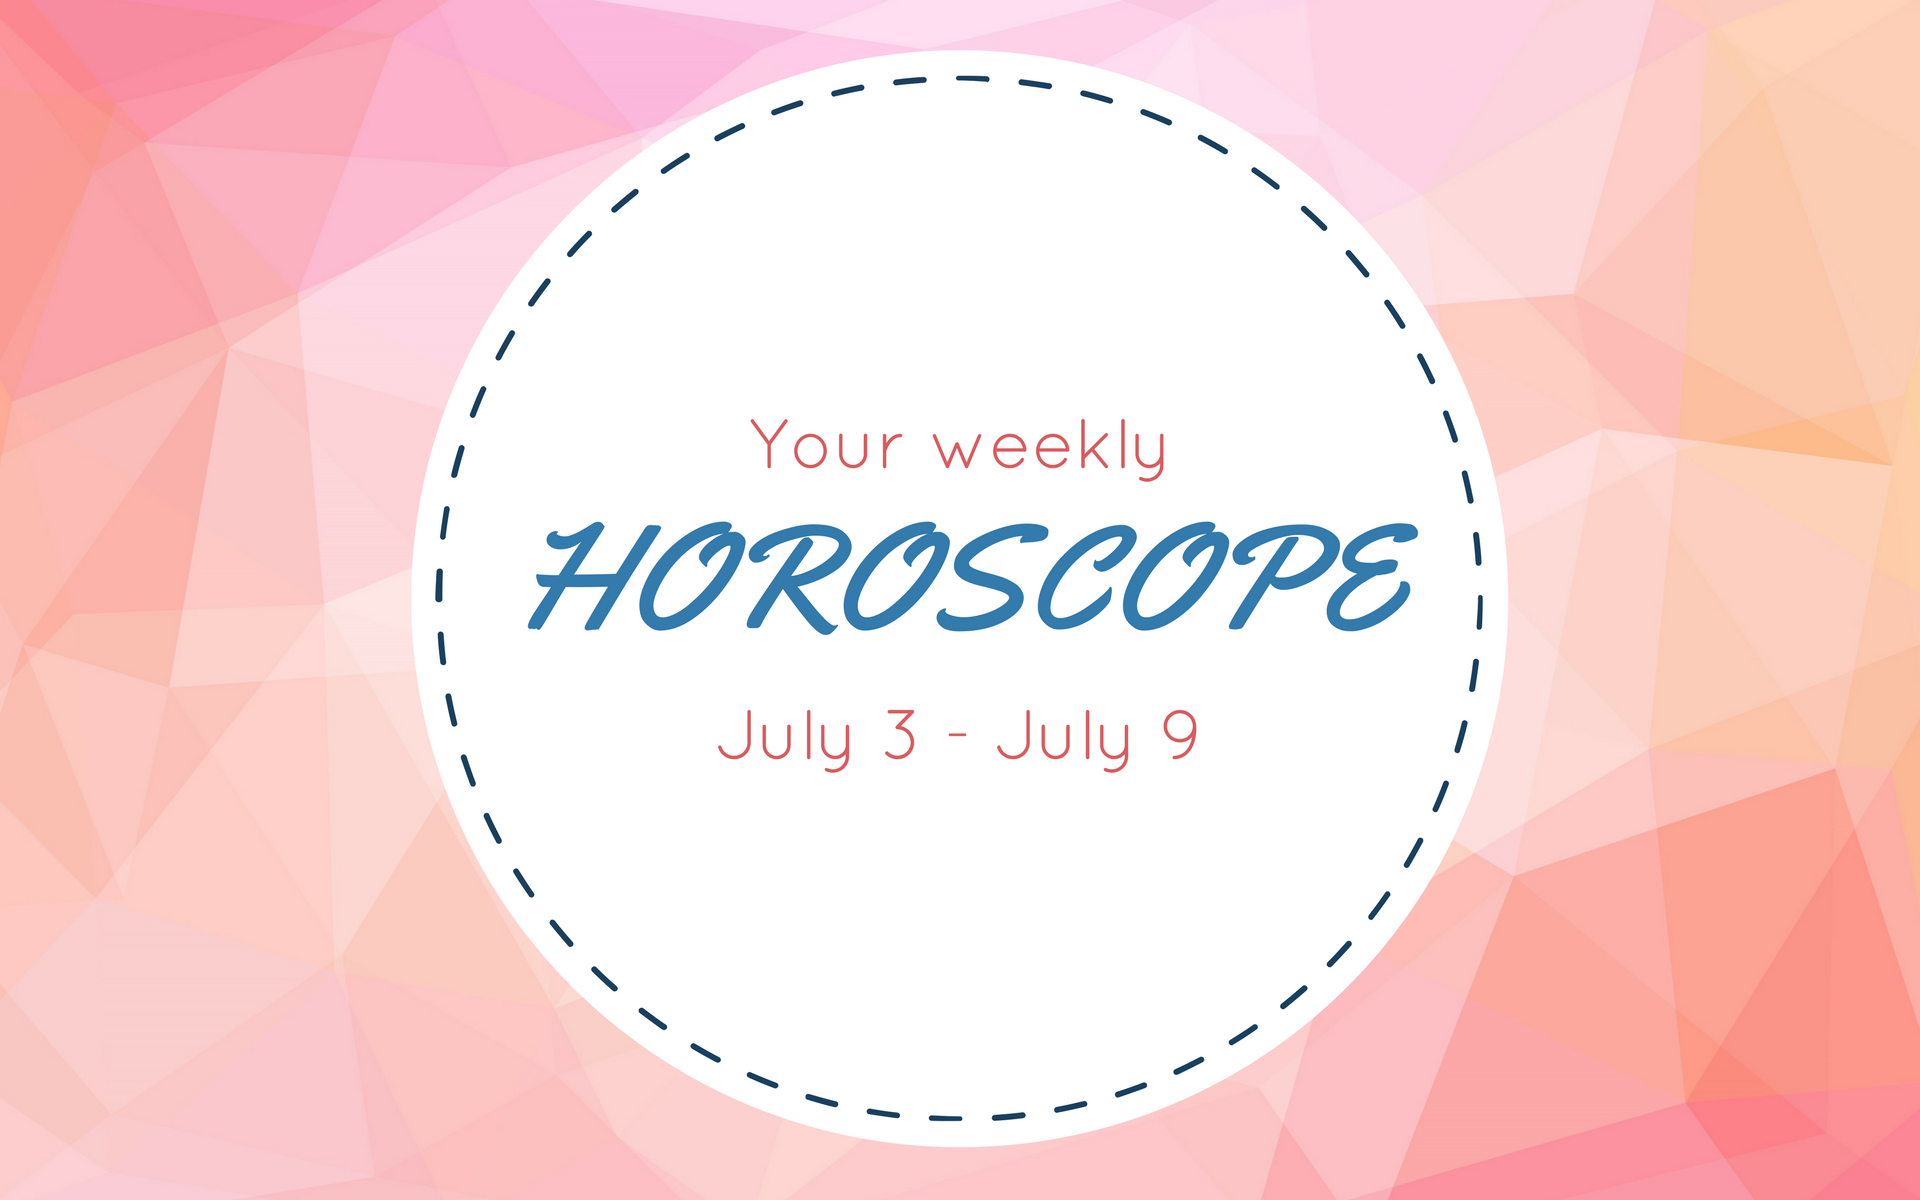 Your Weekly Horoscope: July 3 - July 9